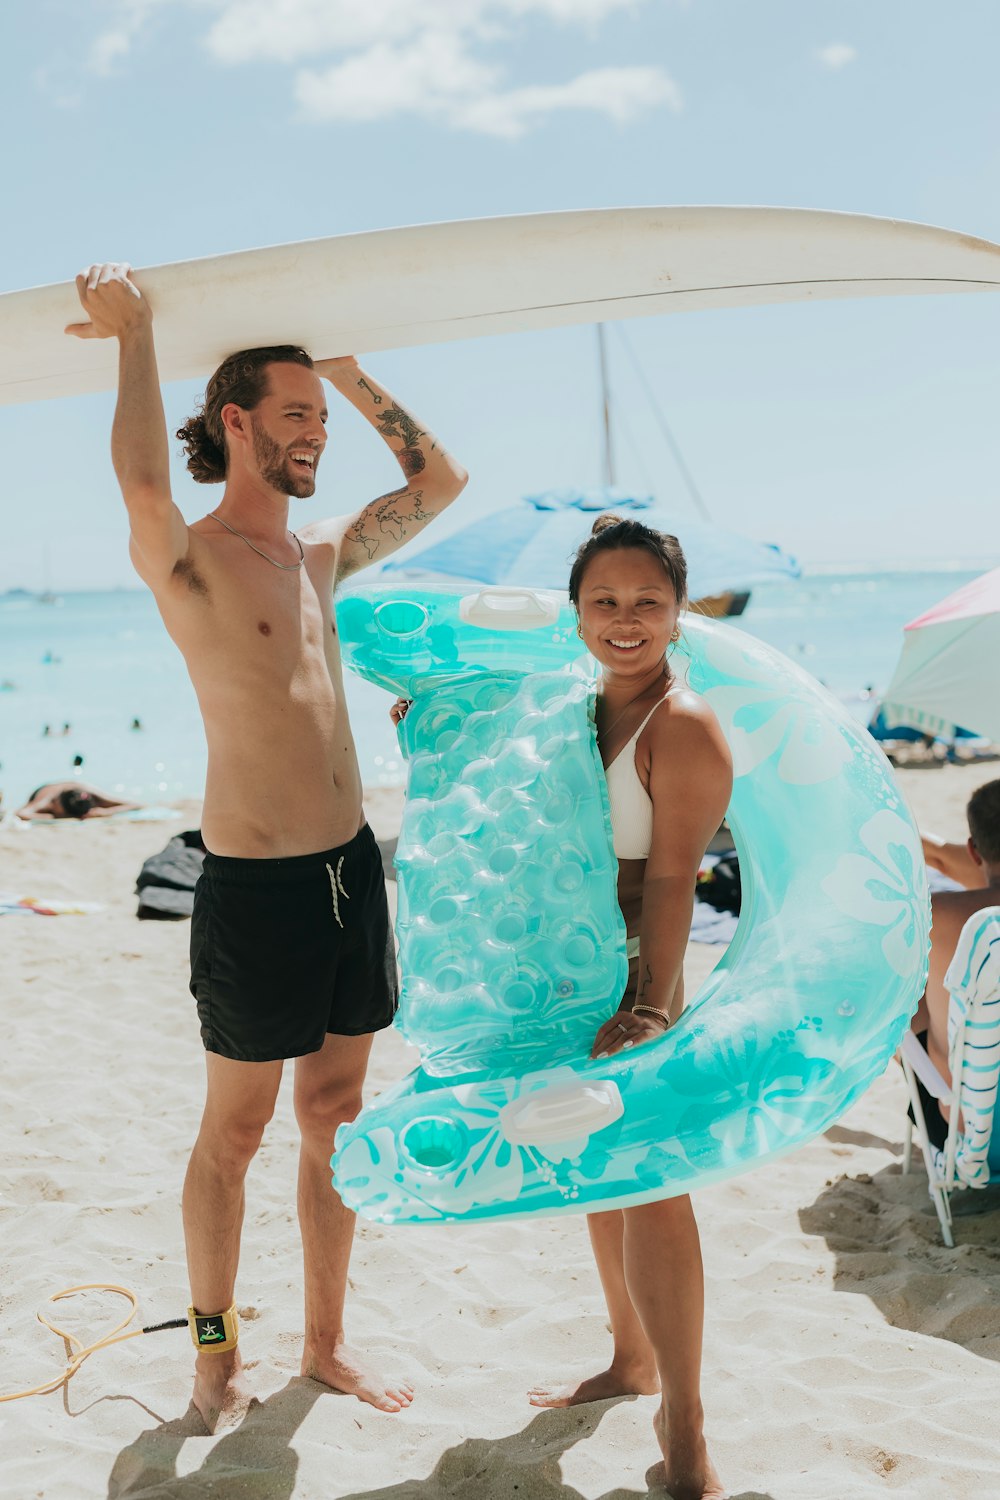 a man and woman holding a surfboard on a beach